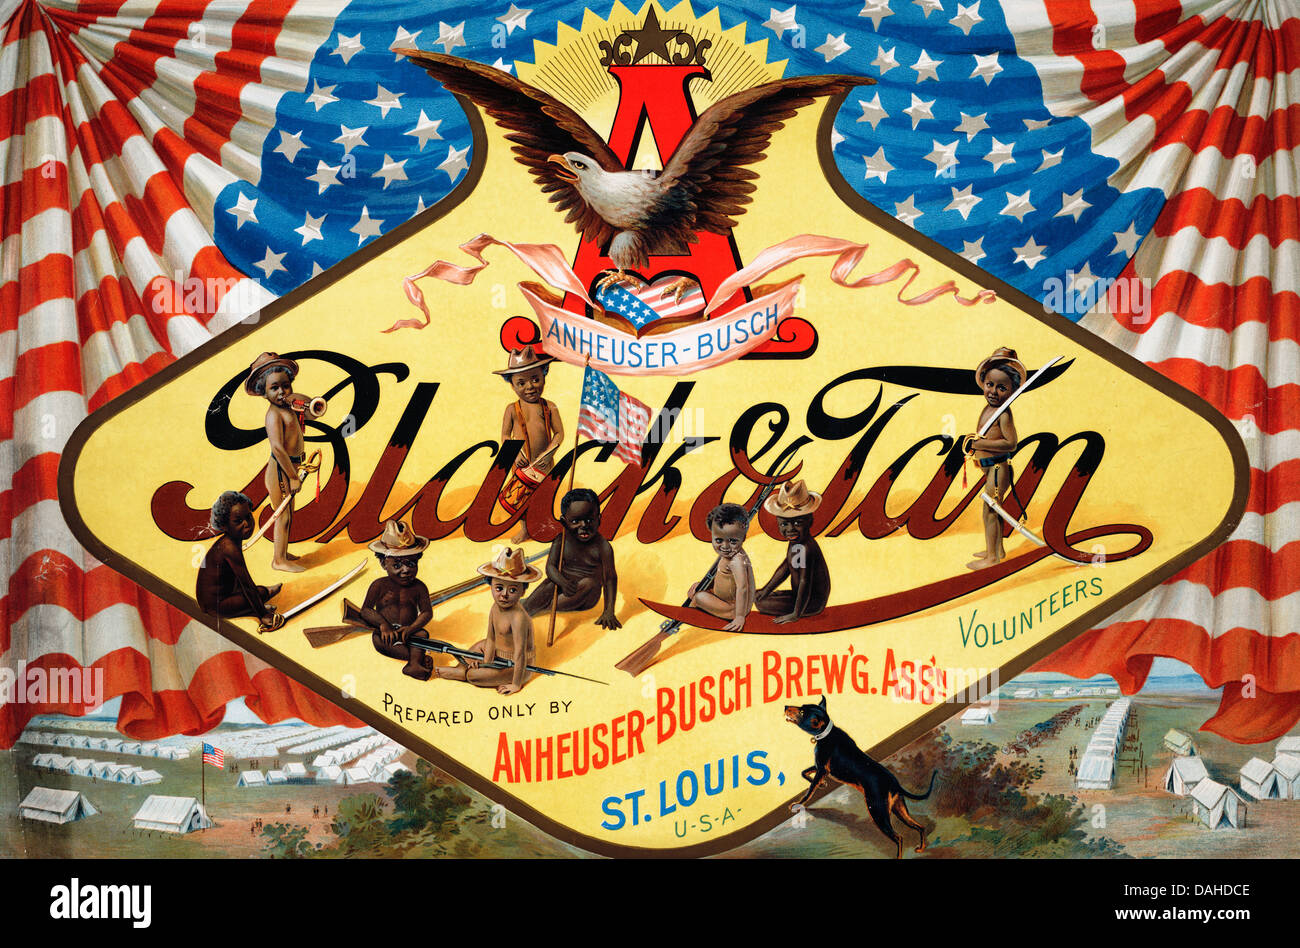 Anheuser-Busch black & tan prepared only by Anheuser-Busch brewing association - Beer advertisement showing African-American children of light and dark complexions wearing confederate hats and holdings swords and rifles like soldiers; the beer logo overlays the American flag while a military camp is seen in the background. 1899 Stock Photo